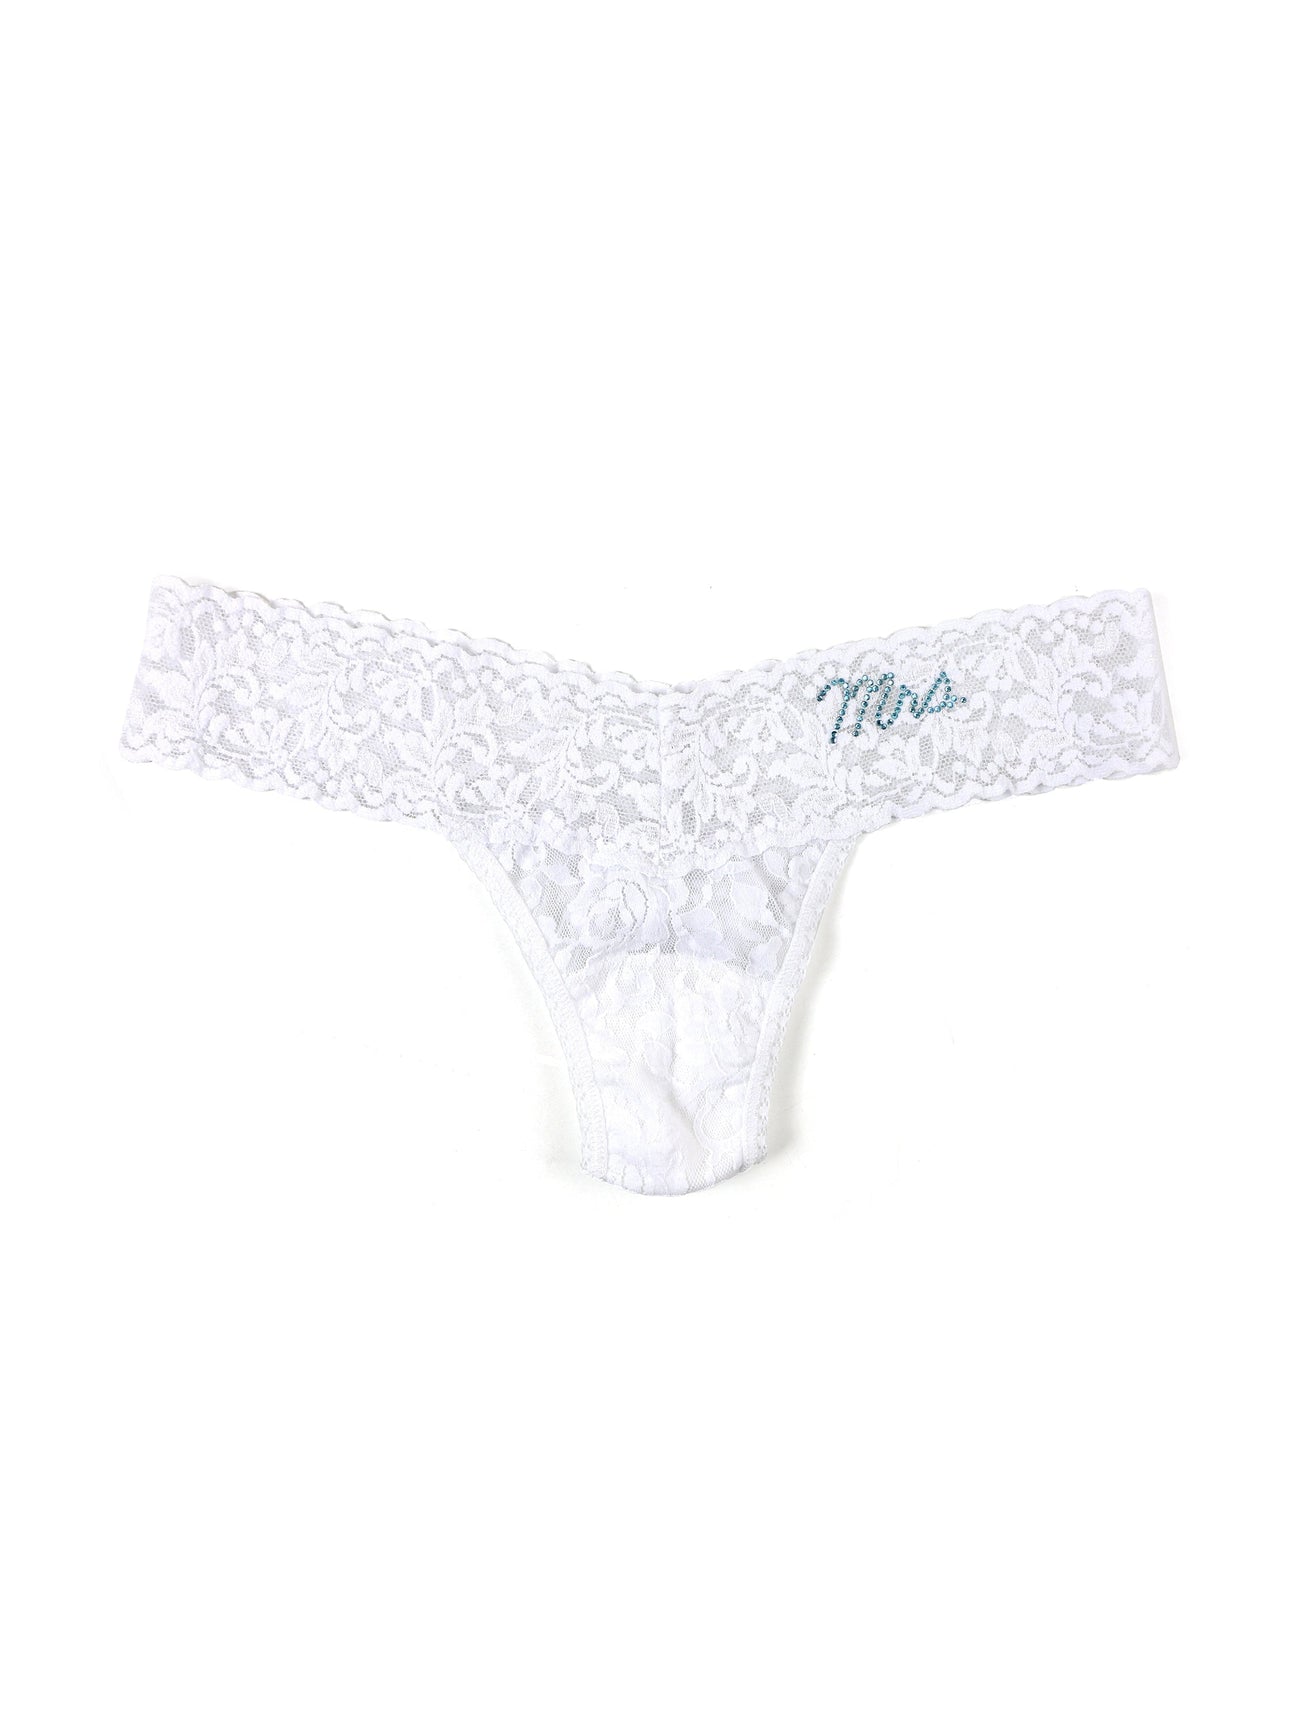 One-size thong with stretch lace